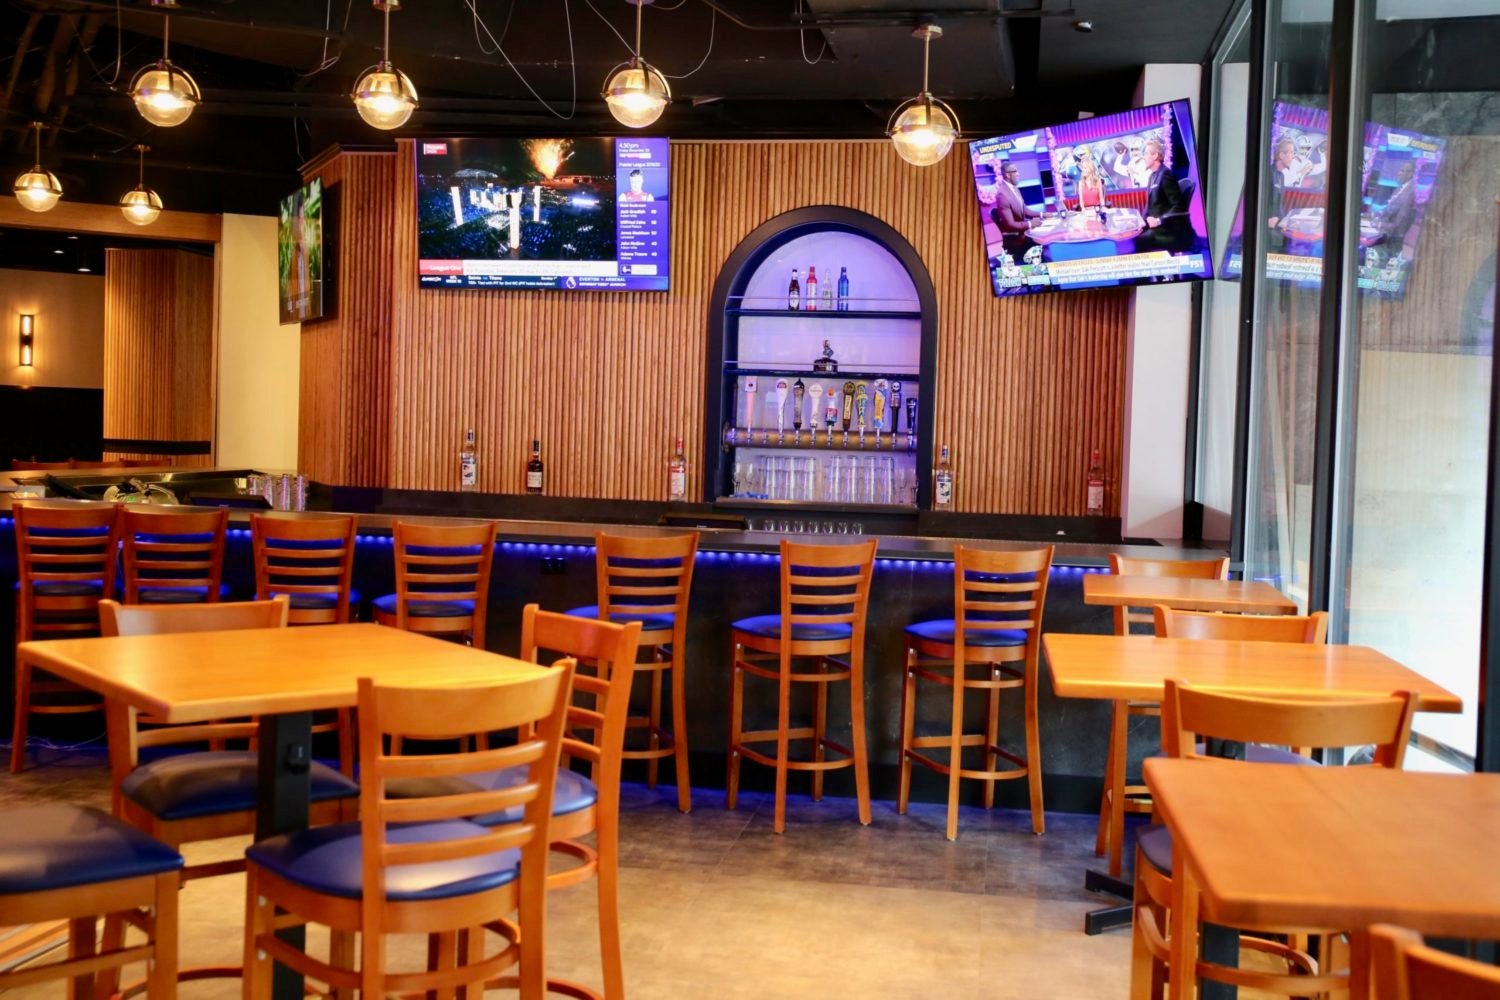 The Admiral opens today in Dupont Circle with 18 flat screen TVs and daily happy hour. Photo by Evy Mages.